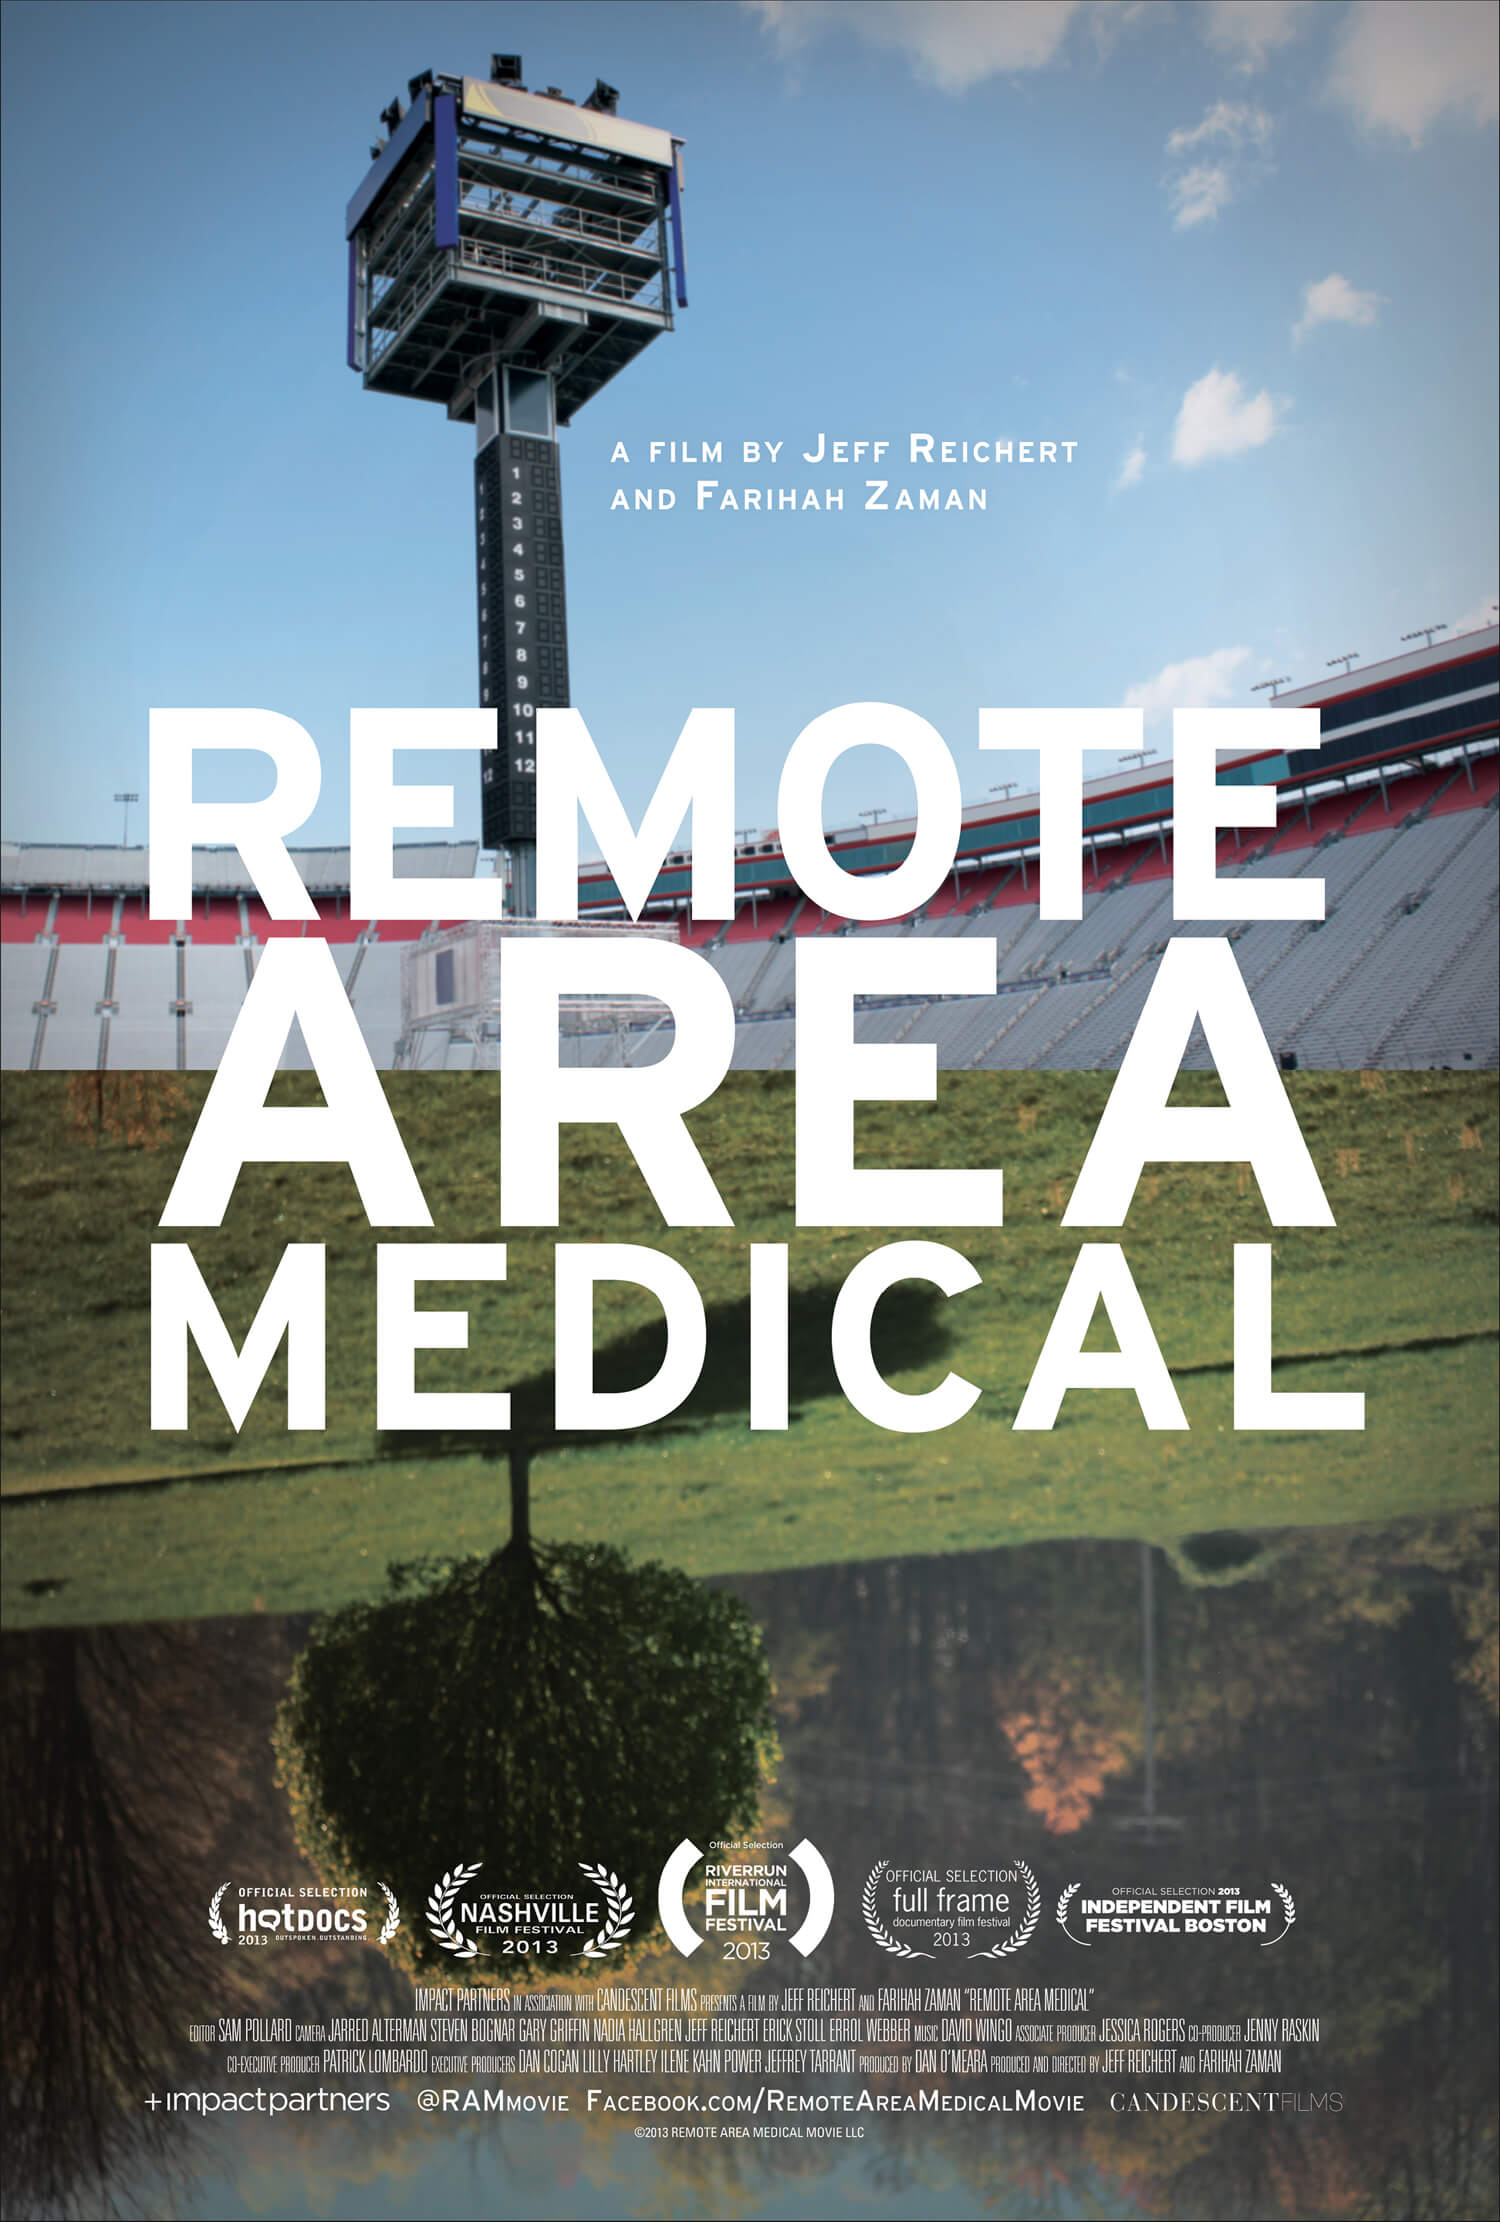 Poster of the film Remote Area Medical. The top half of the poster is an image of a stadium. The bottom half of the poster is upside down, showing the image of a tree in a grassy field with more trees in the background.